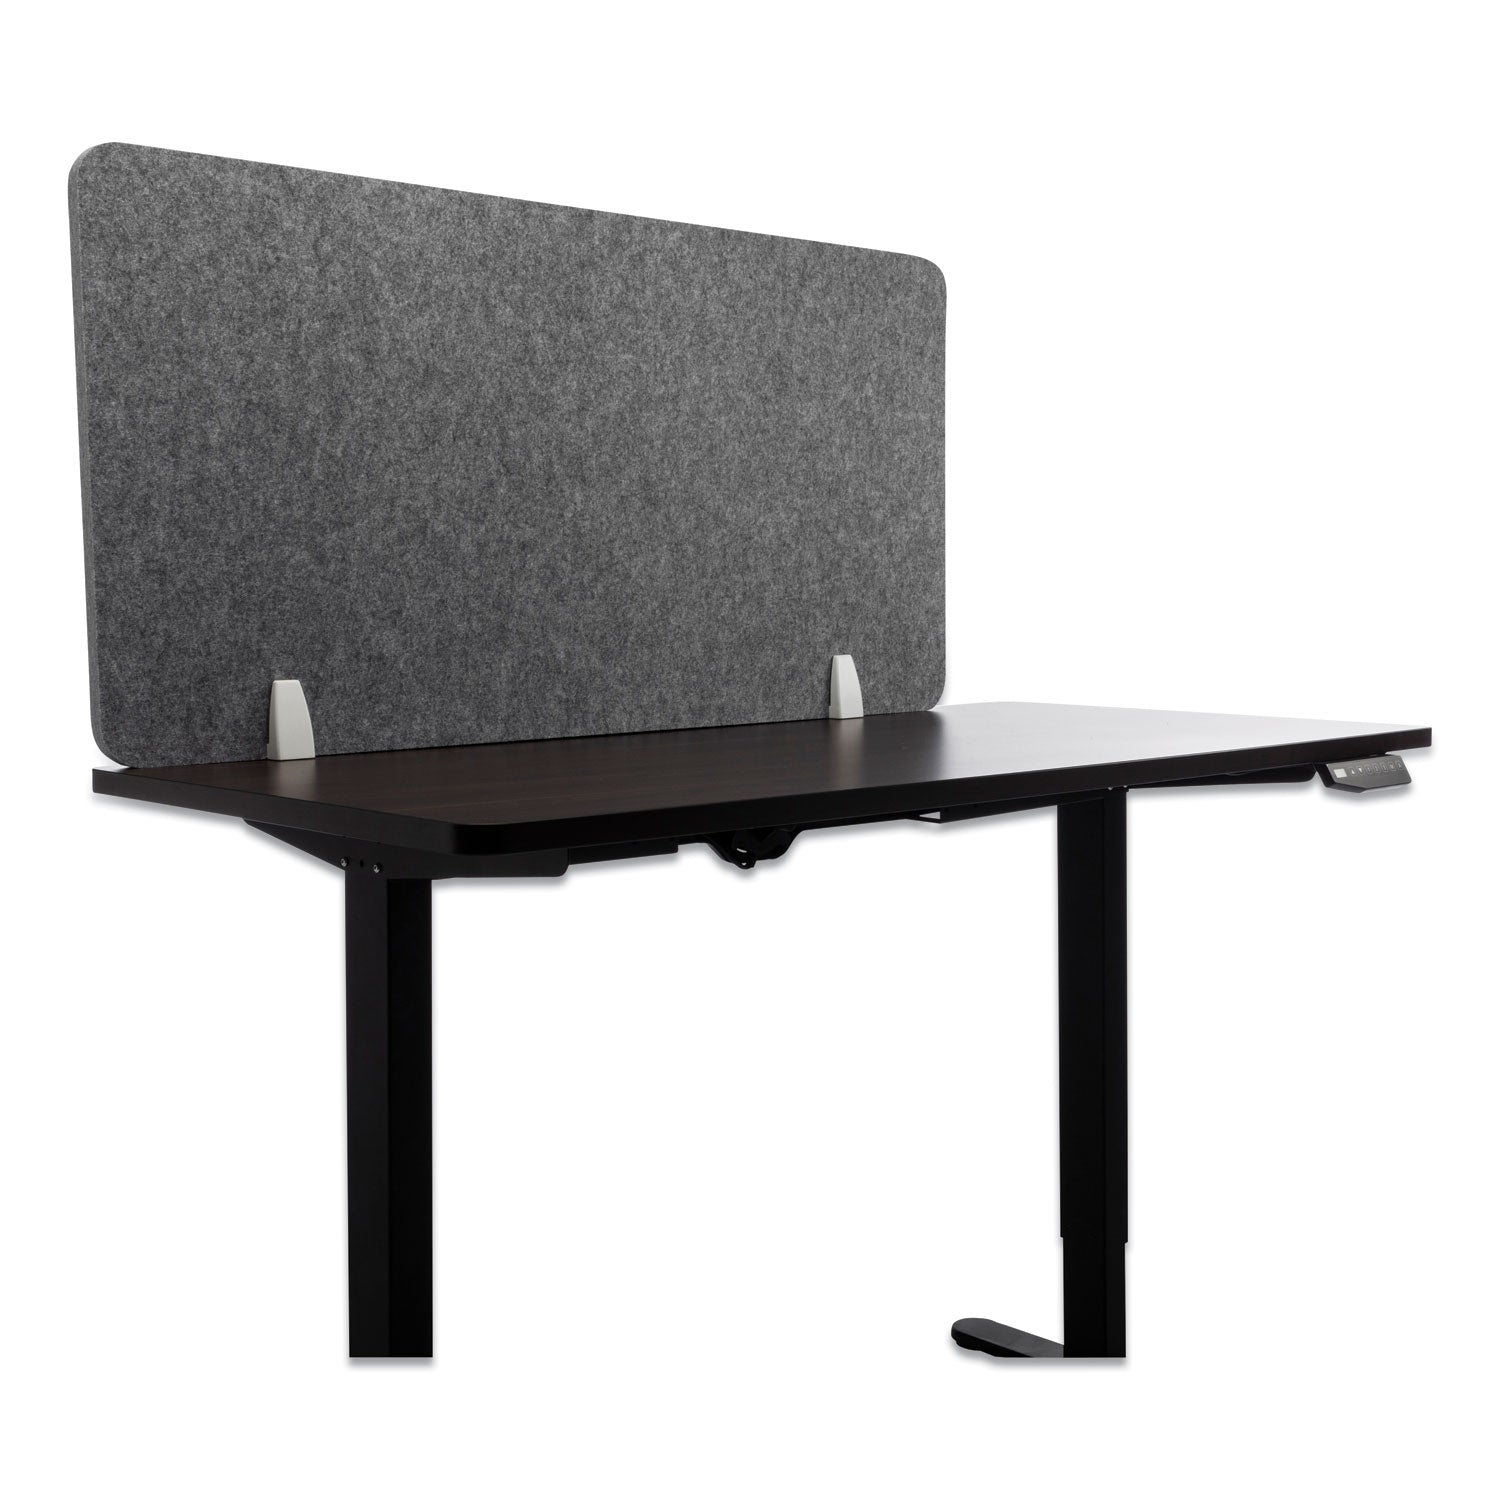 desk-screen-cubicle-panel-and-office-partition-privacy-screen-47-x-1-x-235-polyester-gray_gn1luds48241g - 1